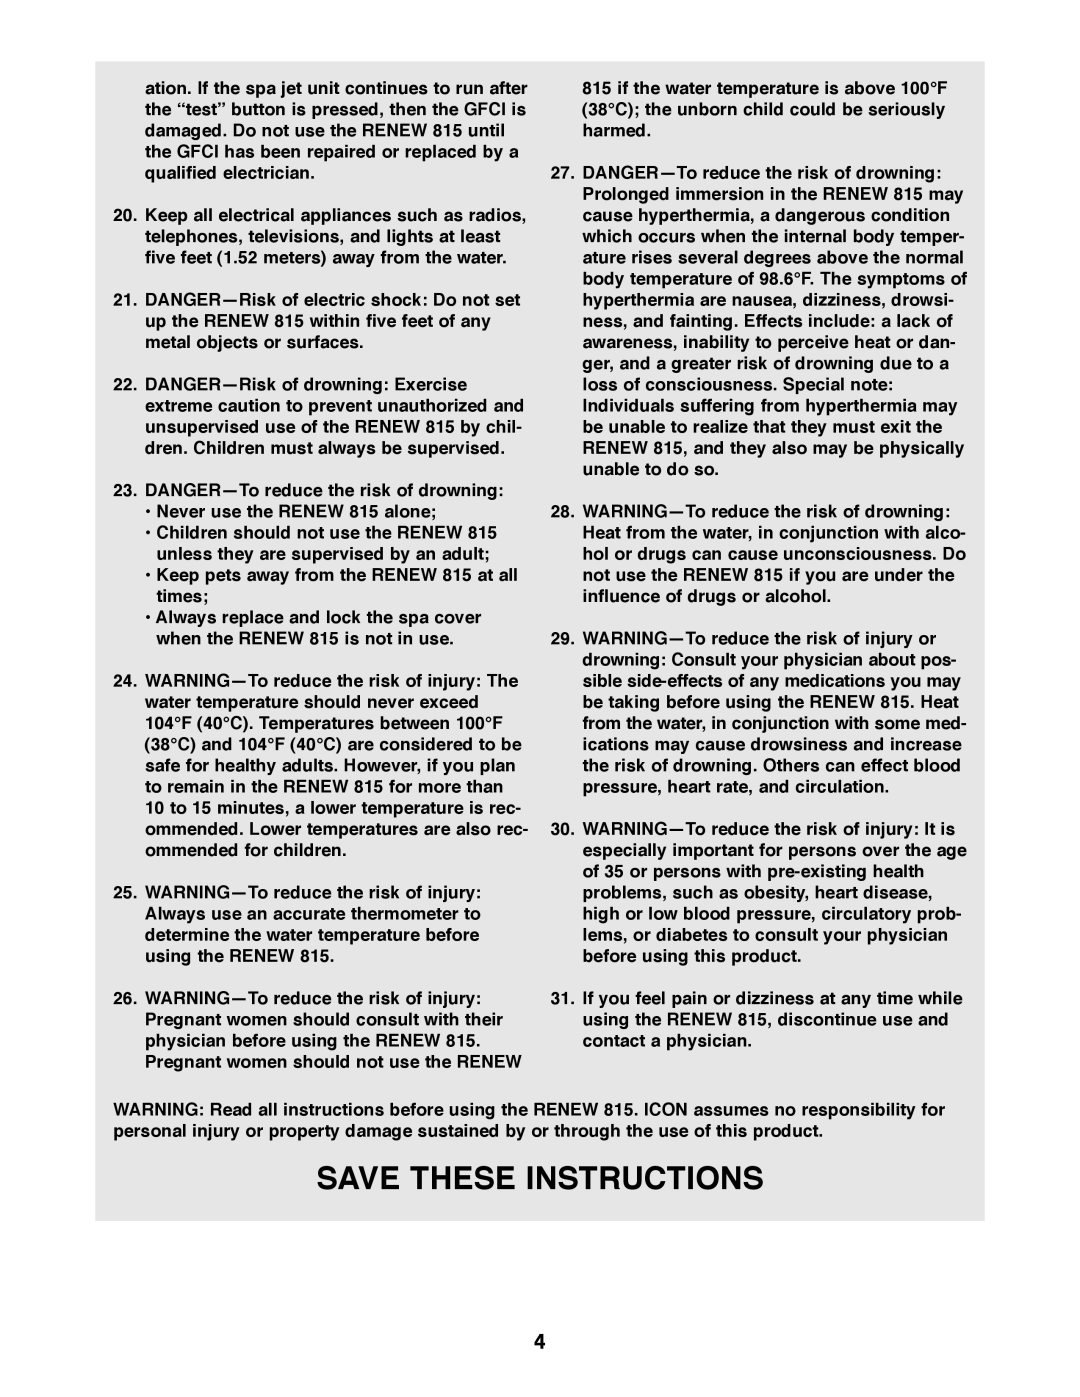 Image IMHS81590 manual Save These Instructions 